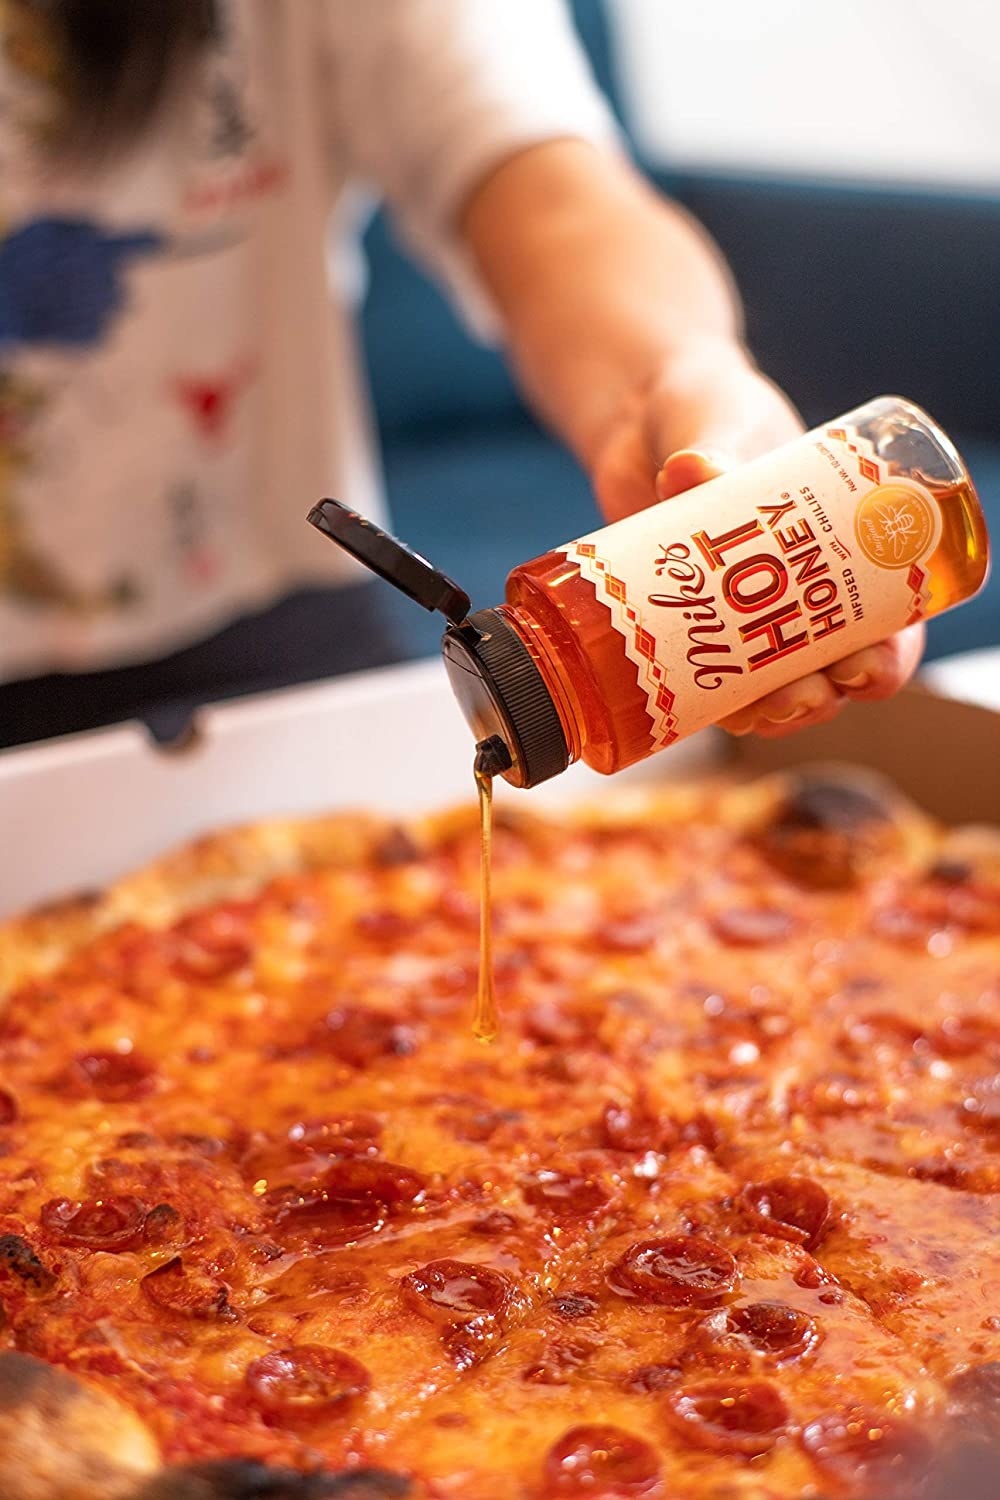 A hand drizzles the honey on a pepperoni pizza